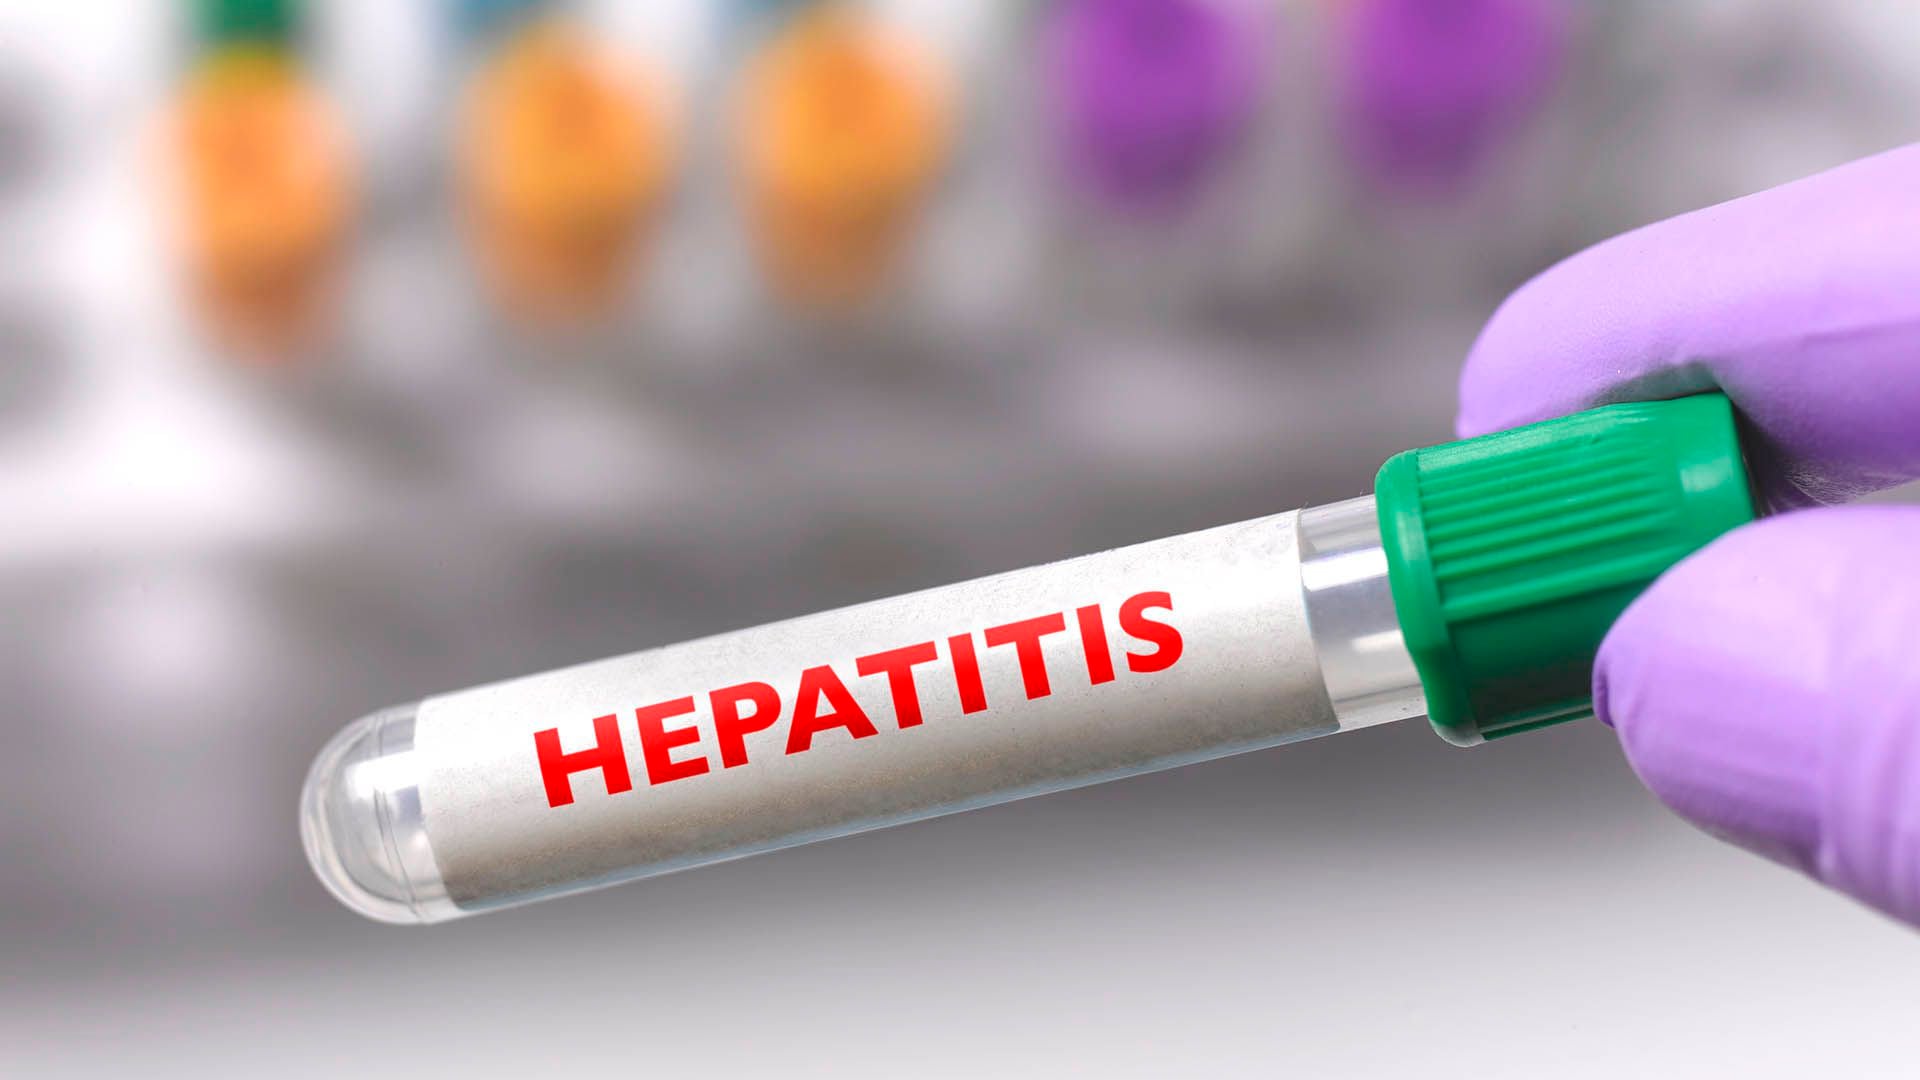 “Studies to detect hepatitis B and C are simple but unfortunately are not part of the routine tests GPs ask for during regular check-ups." (Getty Images)